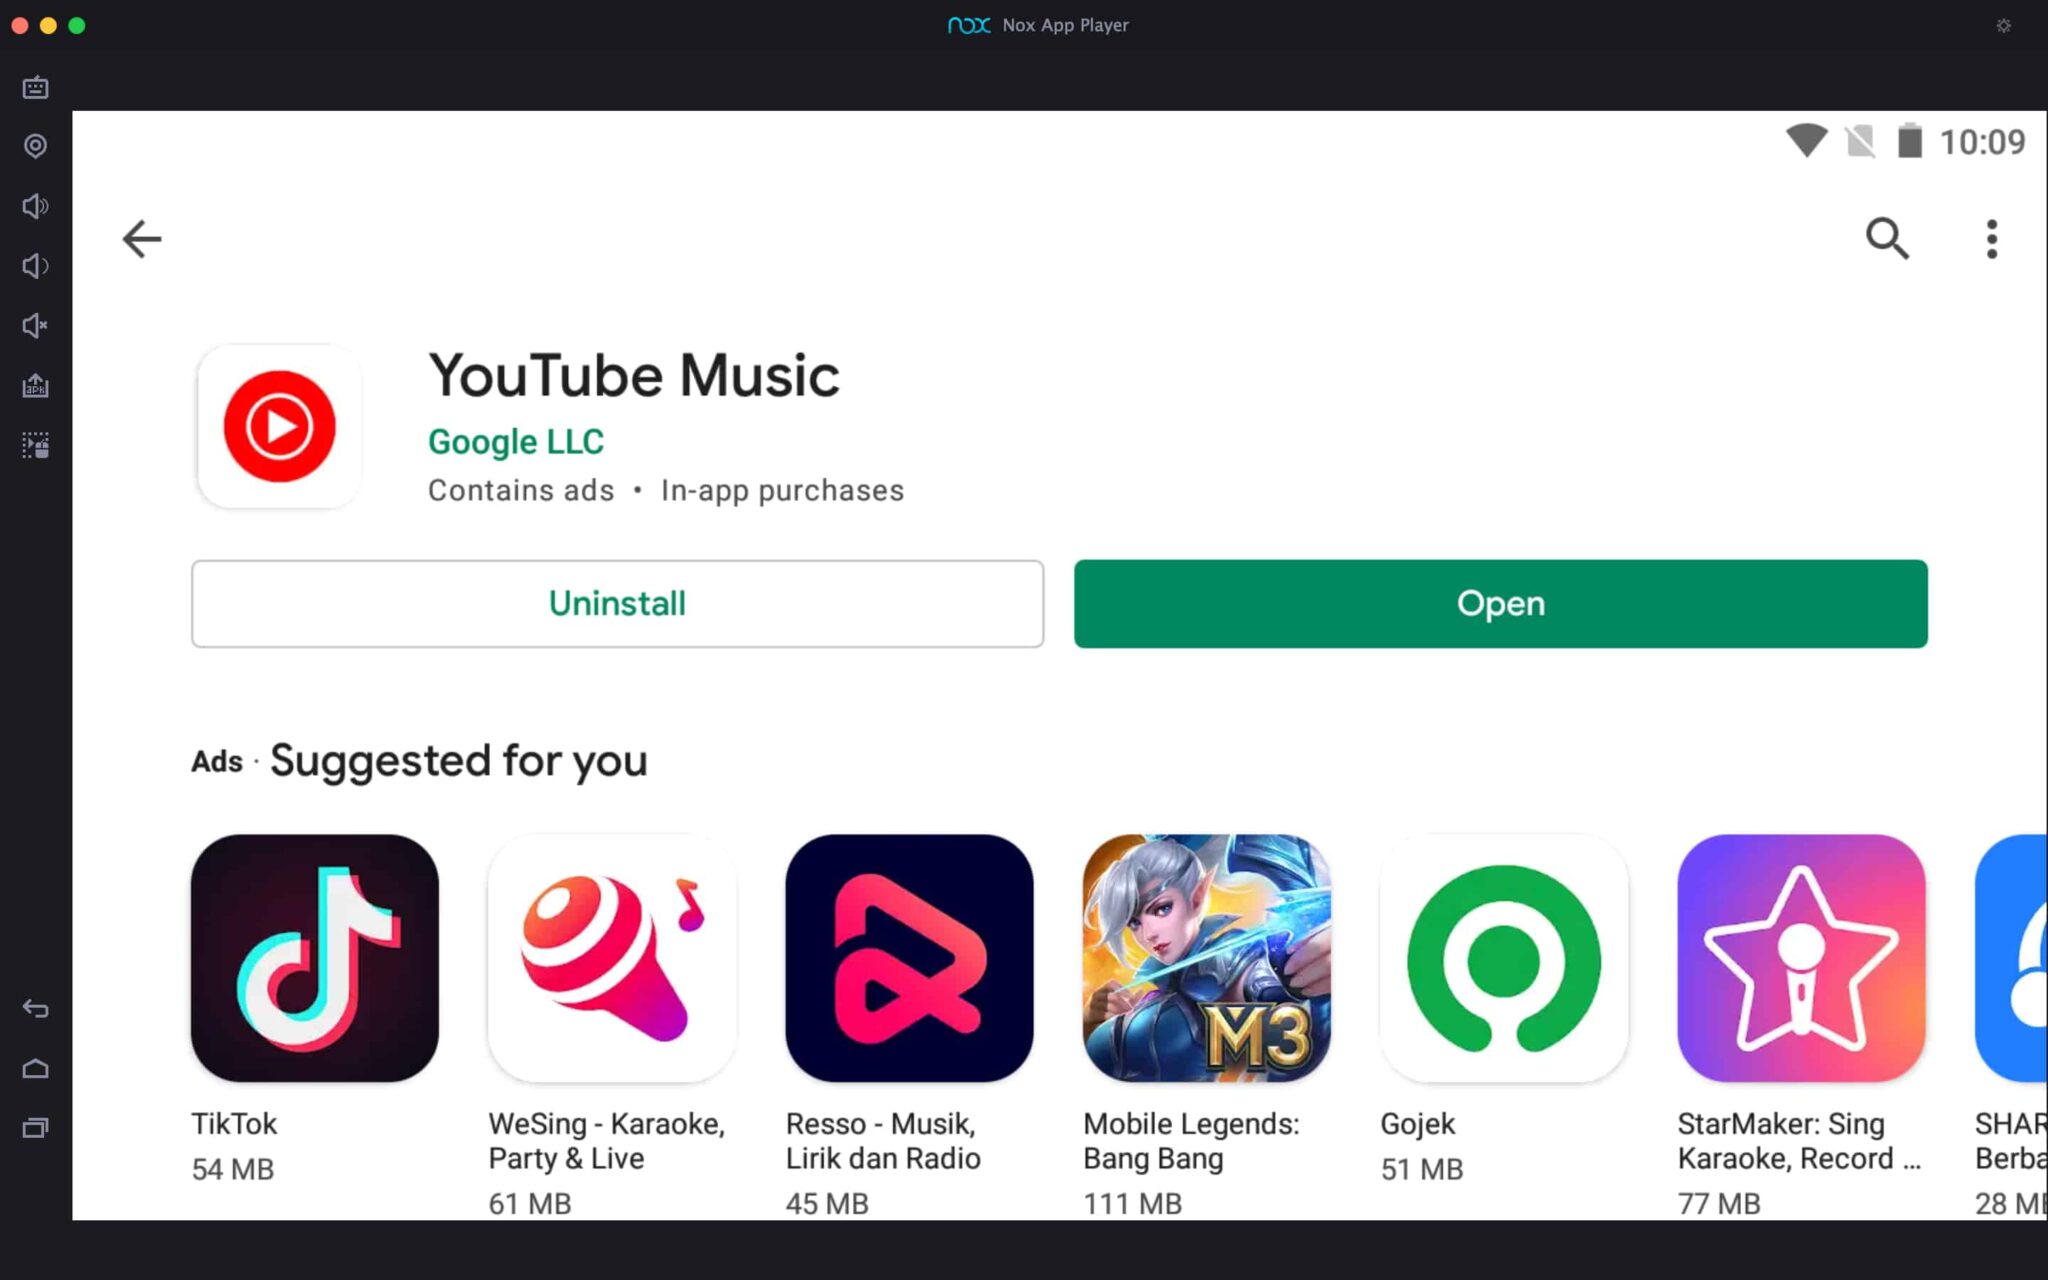 YouTube Music App For PC installation